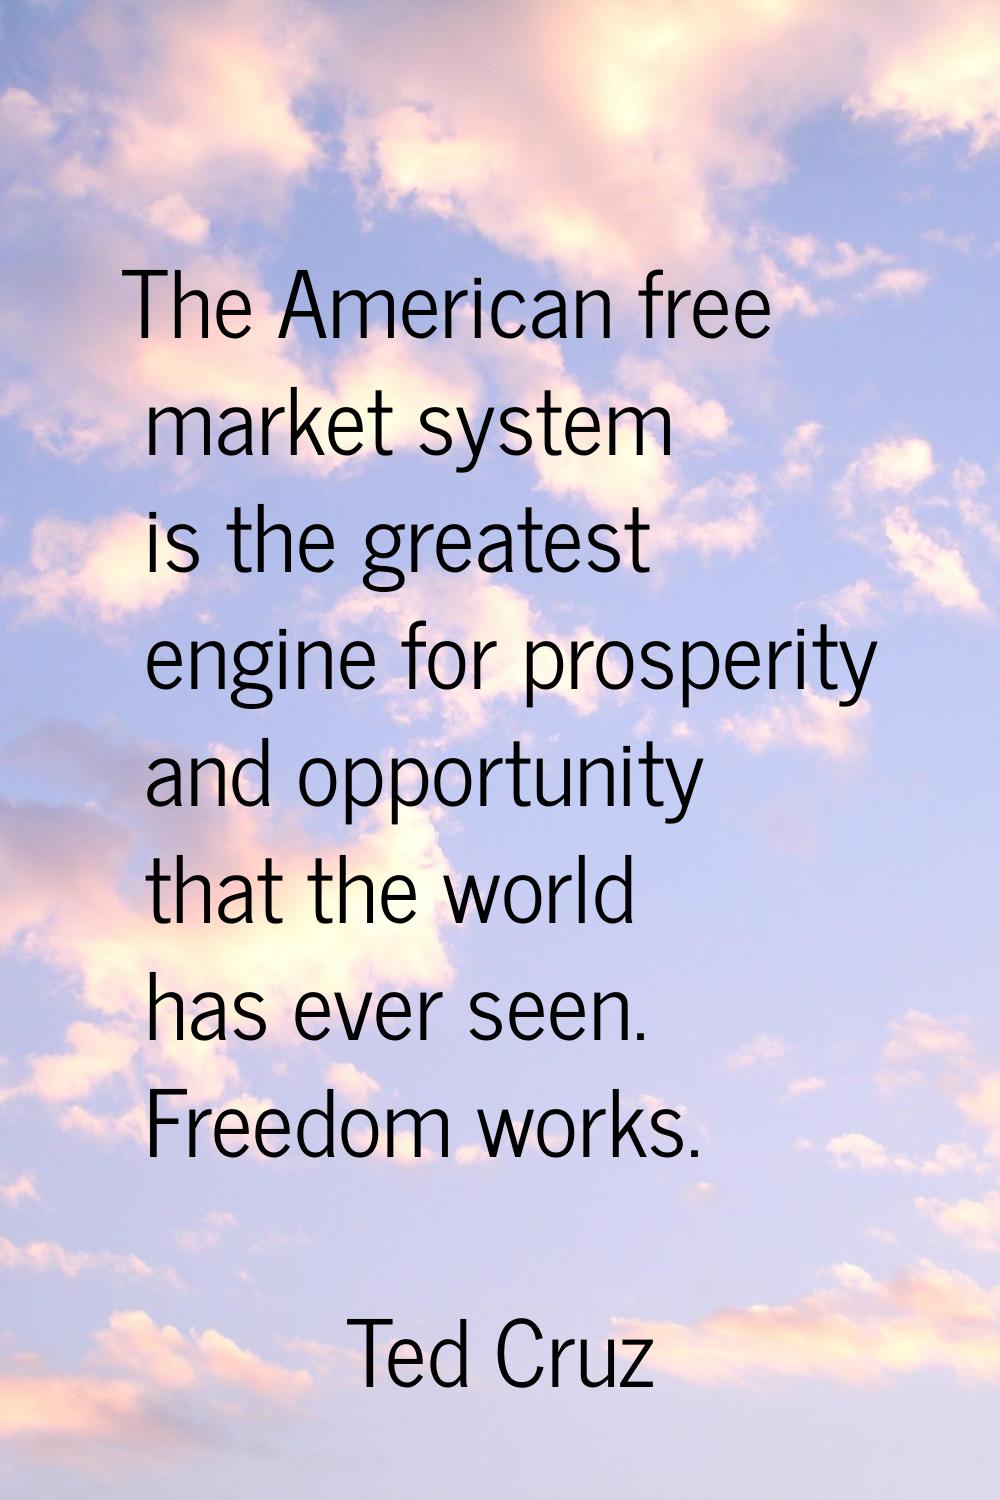 The American free market system is the greatest engine for prosperity and opportunity that the worl